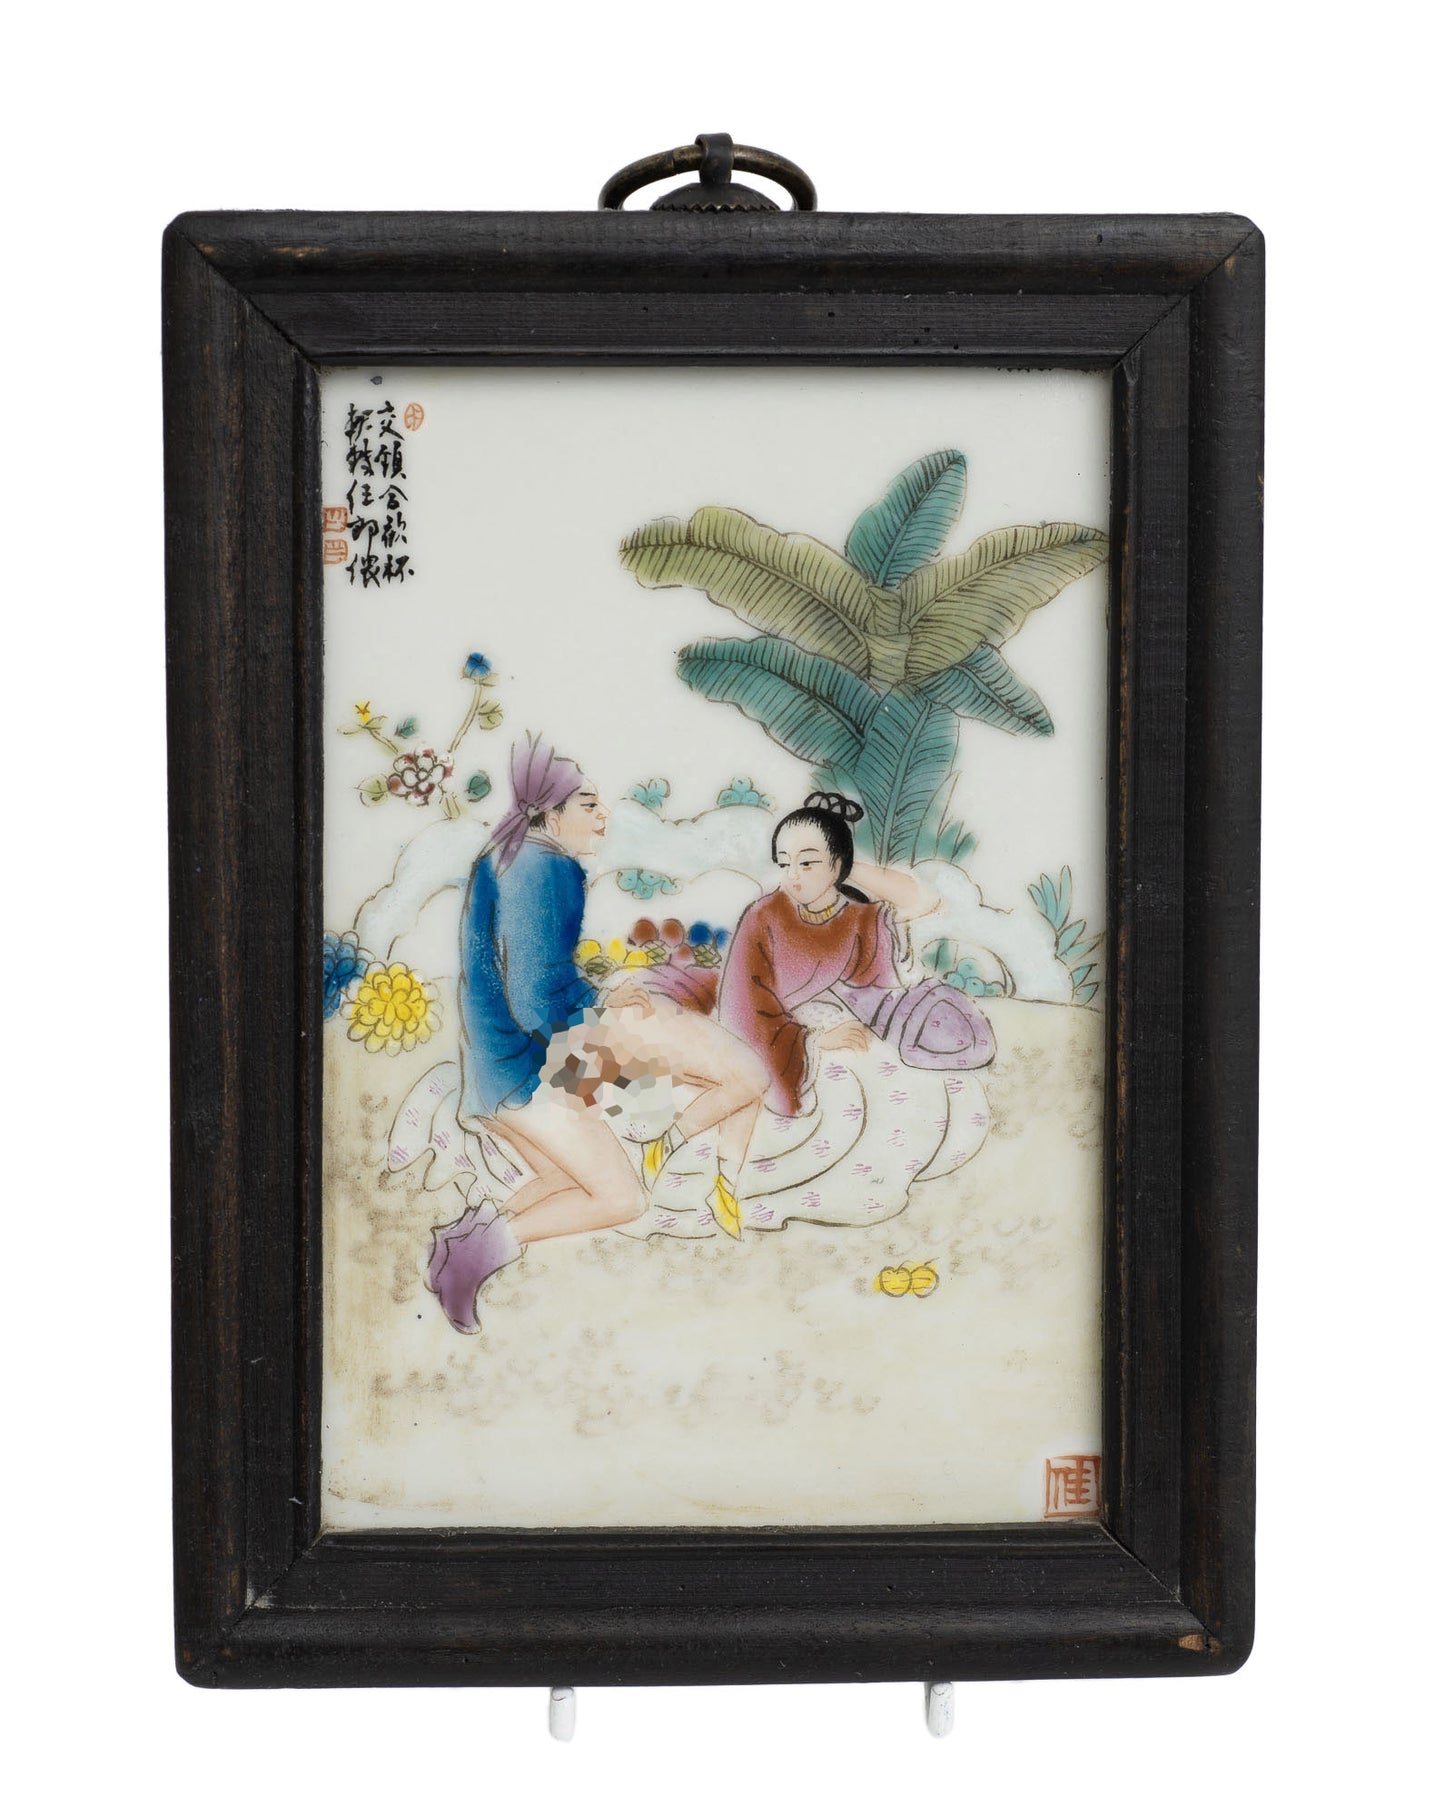 Chinese Hand Painted Famille Rose Erotic Porcelain Plaque With Couple in Coitus (Code 2869)